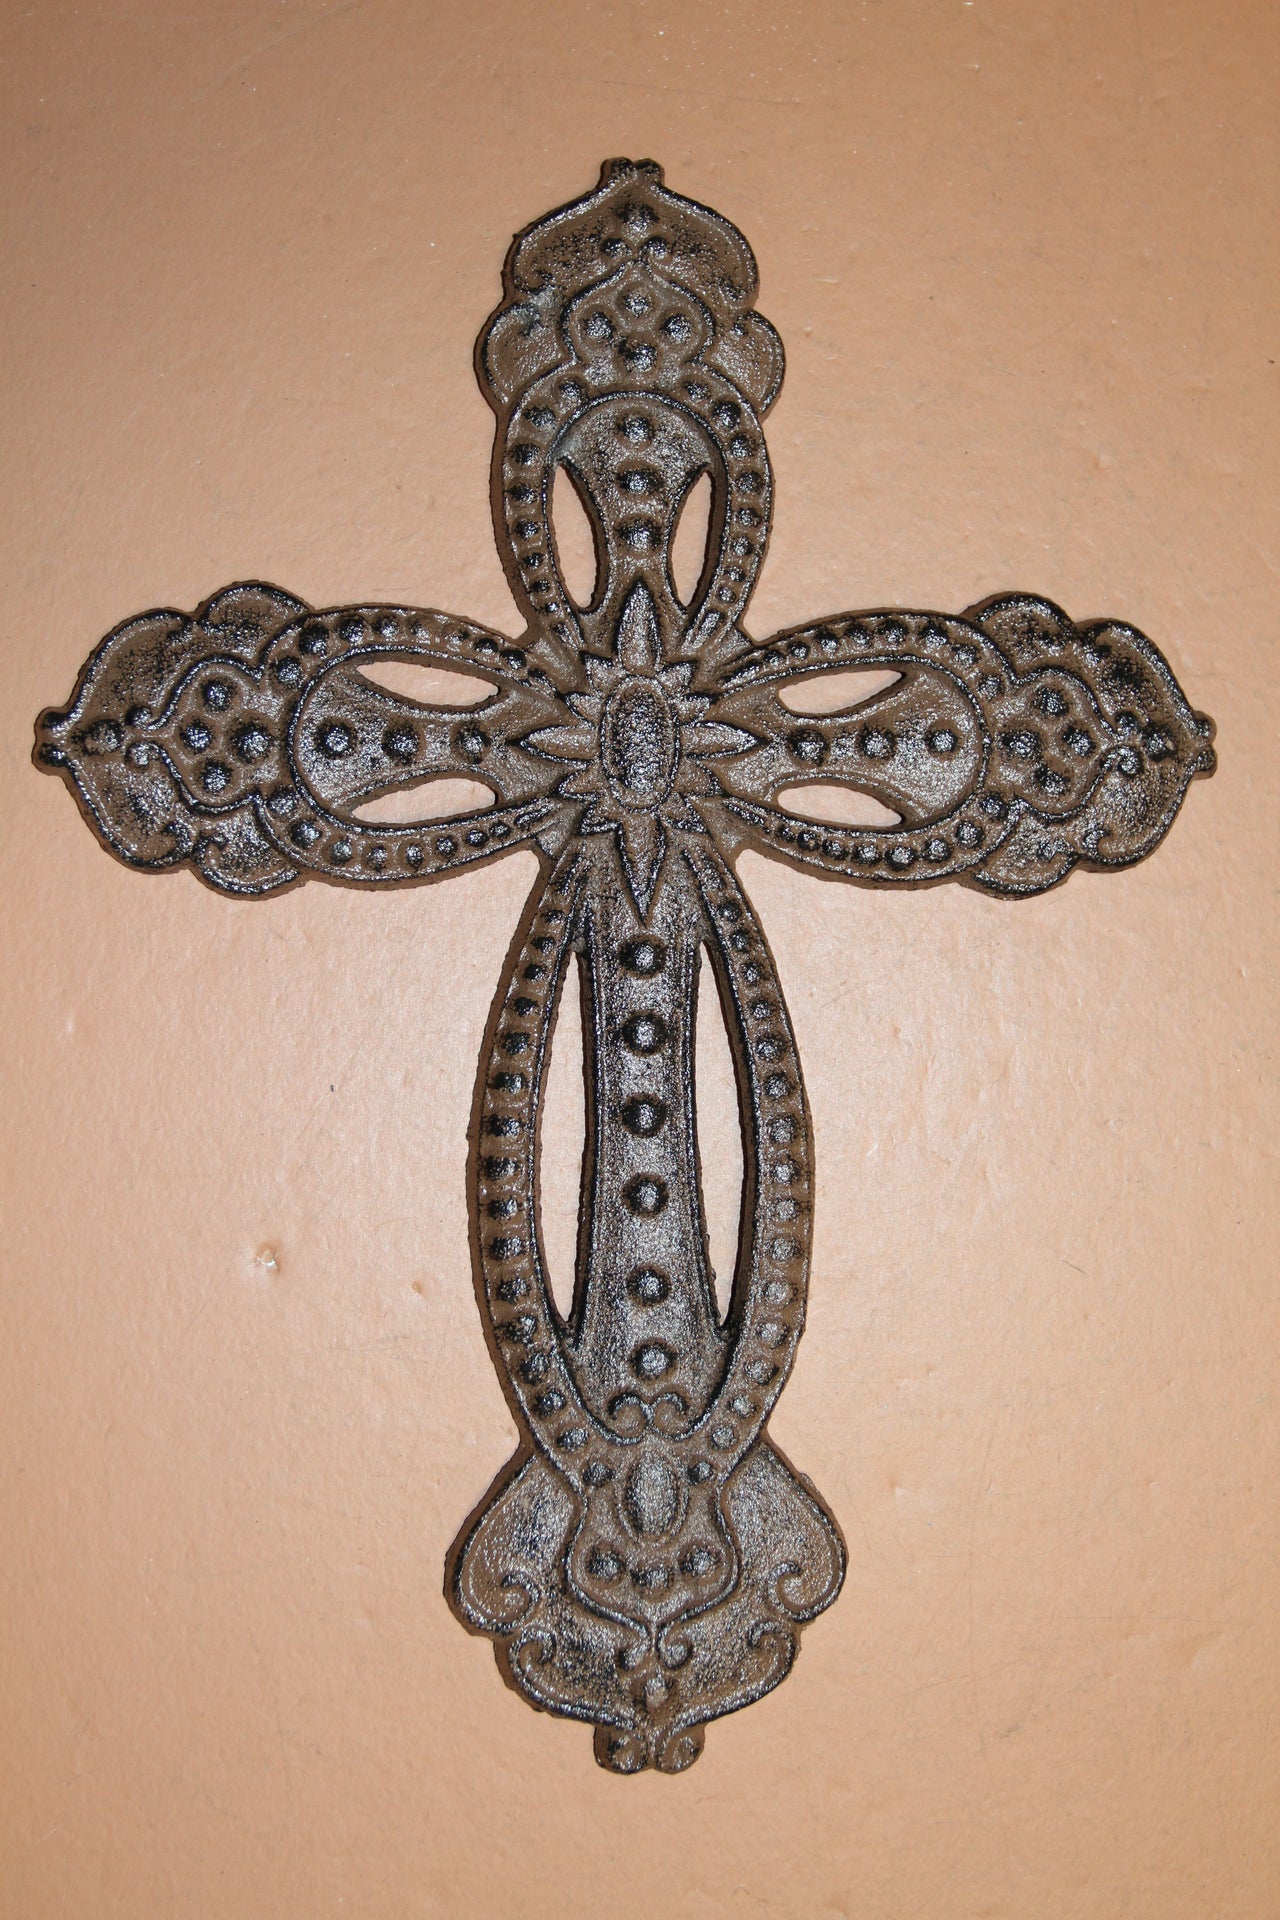 New! 4 Pc or 8 Pc Hanging Wall Cross "Destiny" Collection Set, Rustic decor, religious, spirituality gift ideas and more! Ships Free! C6, 21, 45B,46